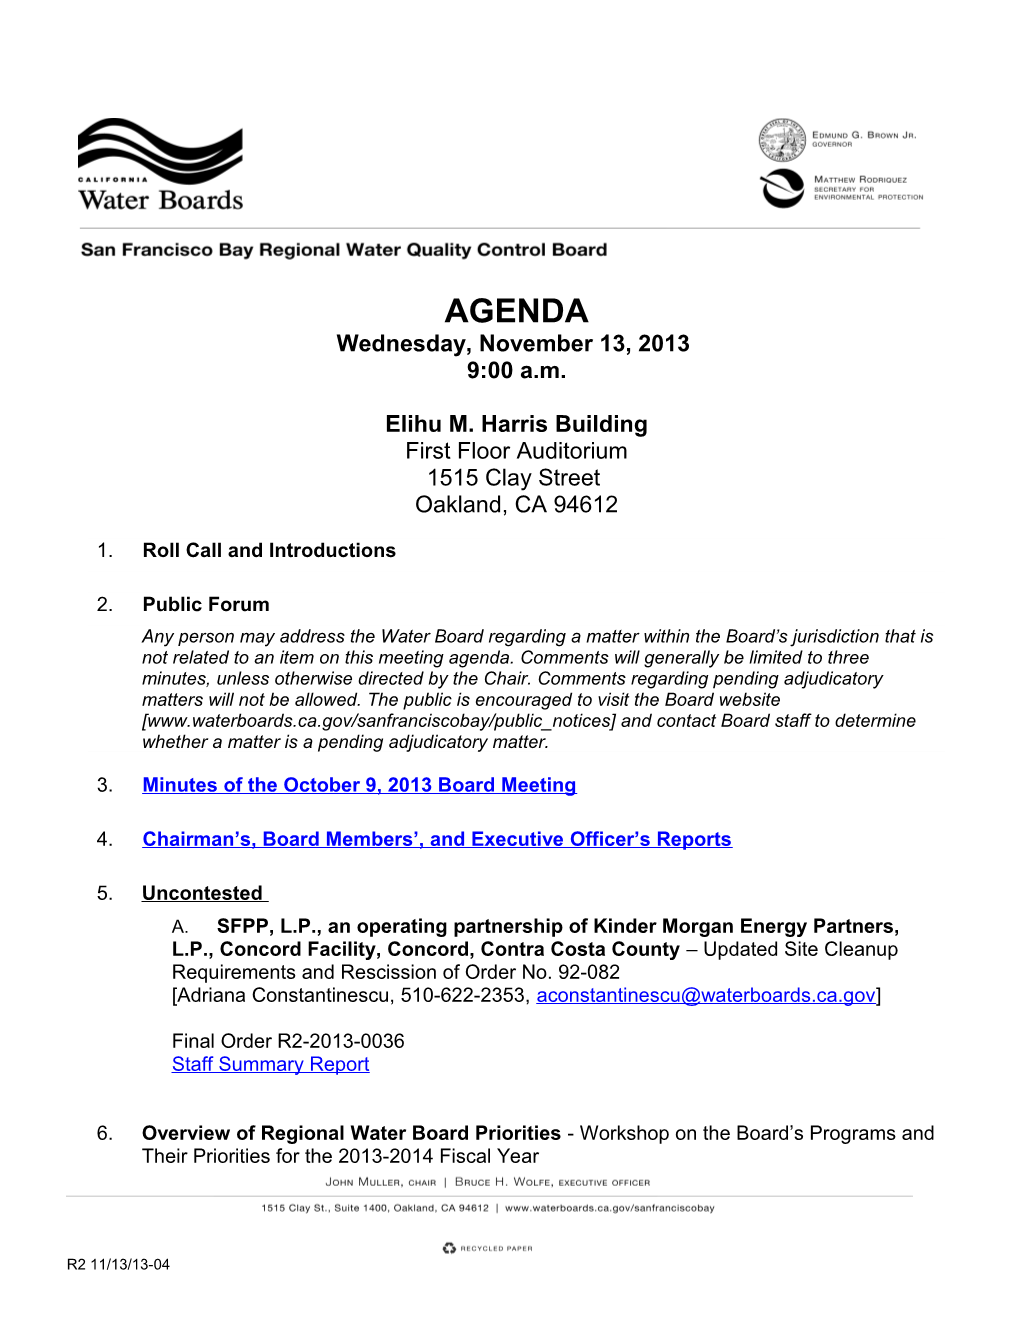 Water Board Meeting Agenda Page 2 s3